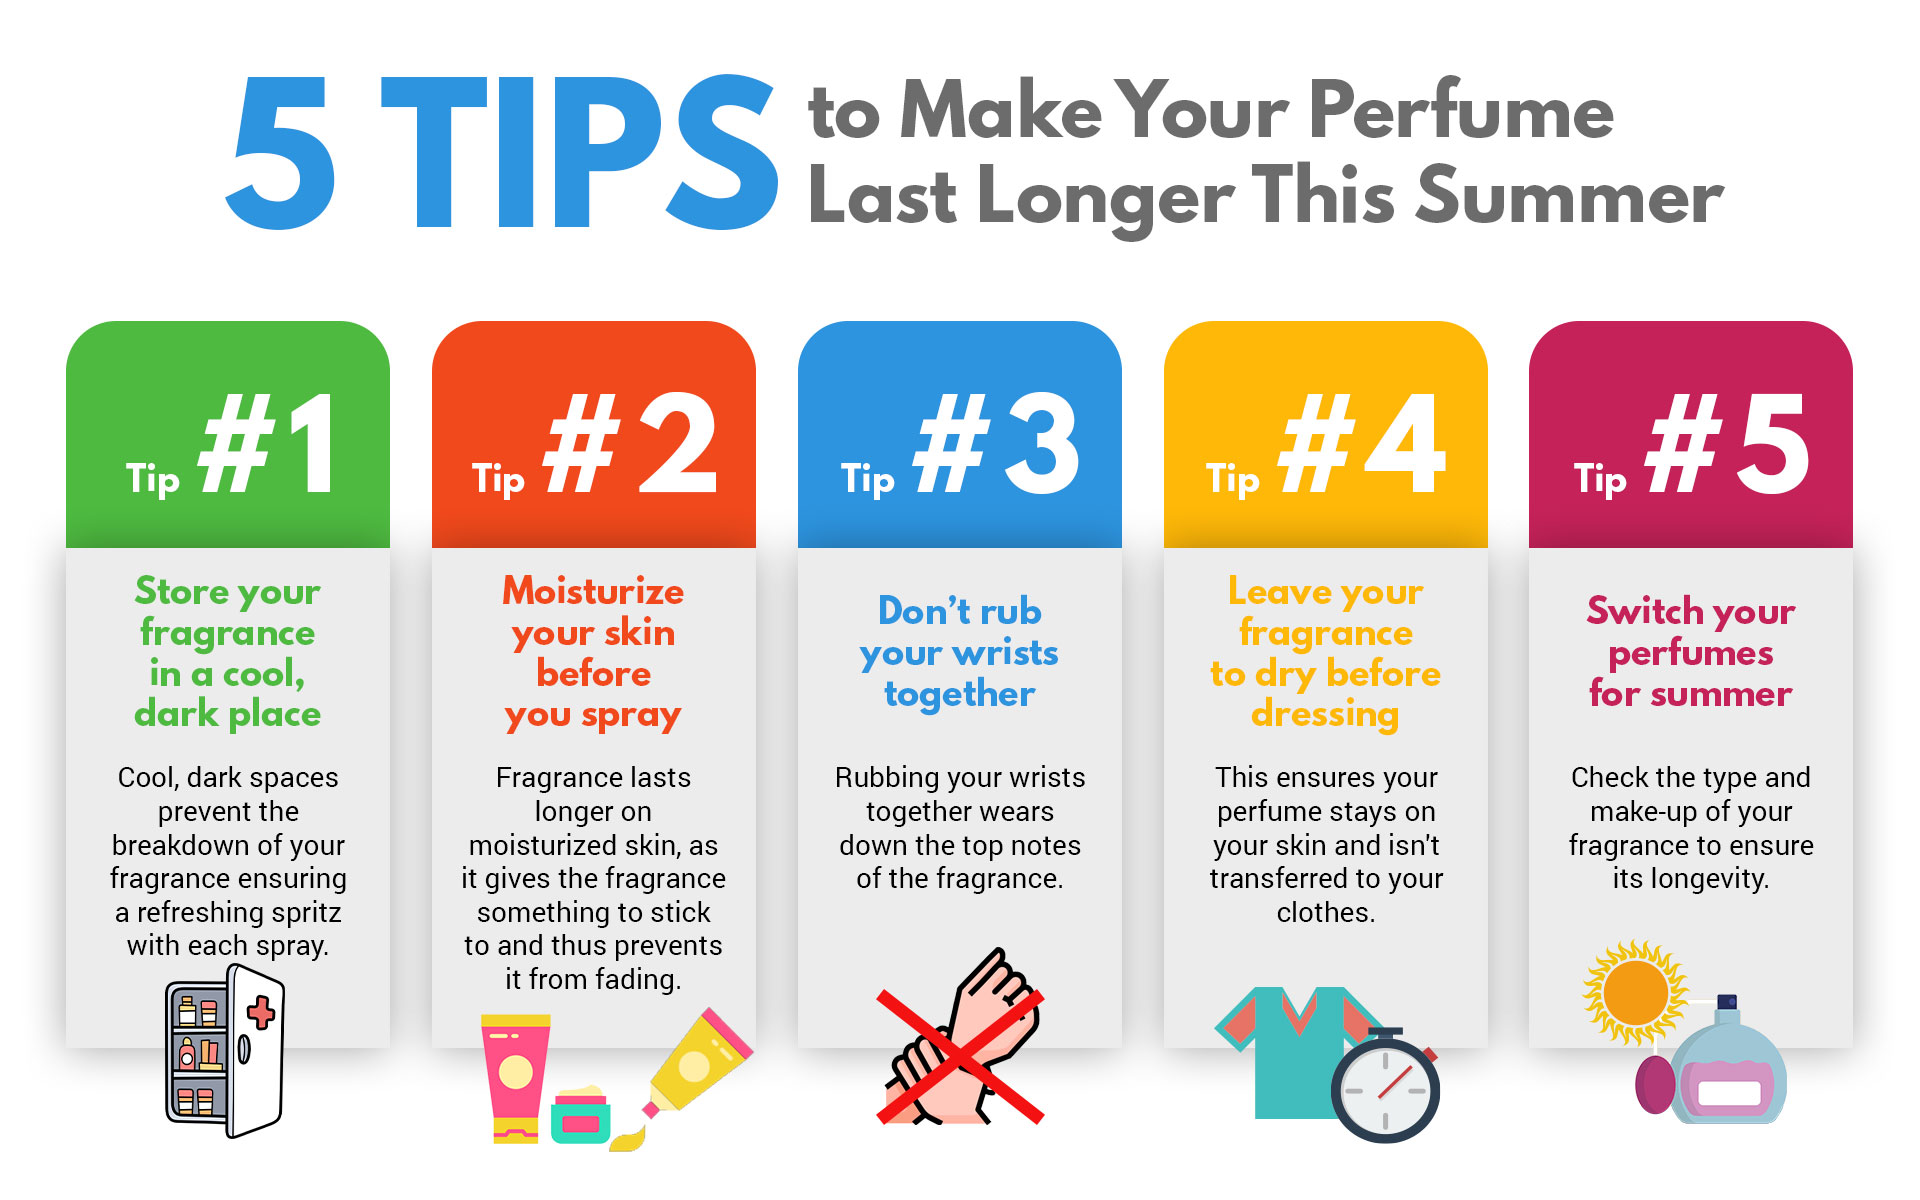 5 Tips to make your perfume last longer in the summer